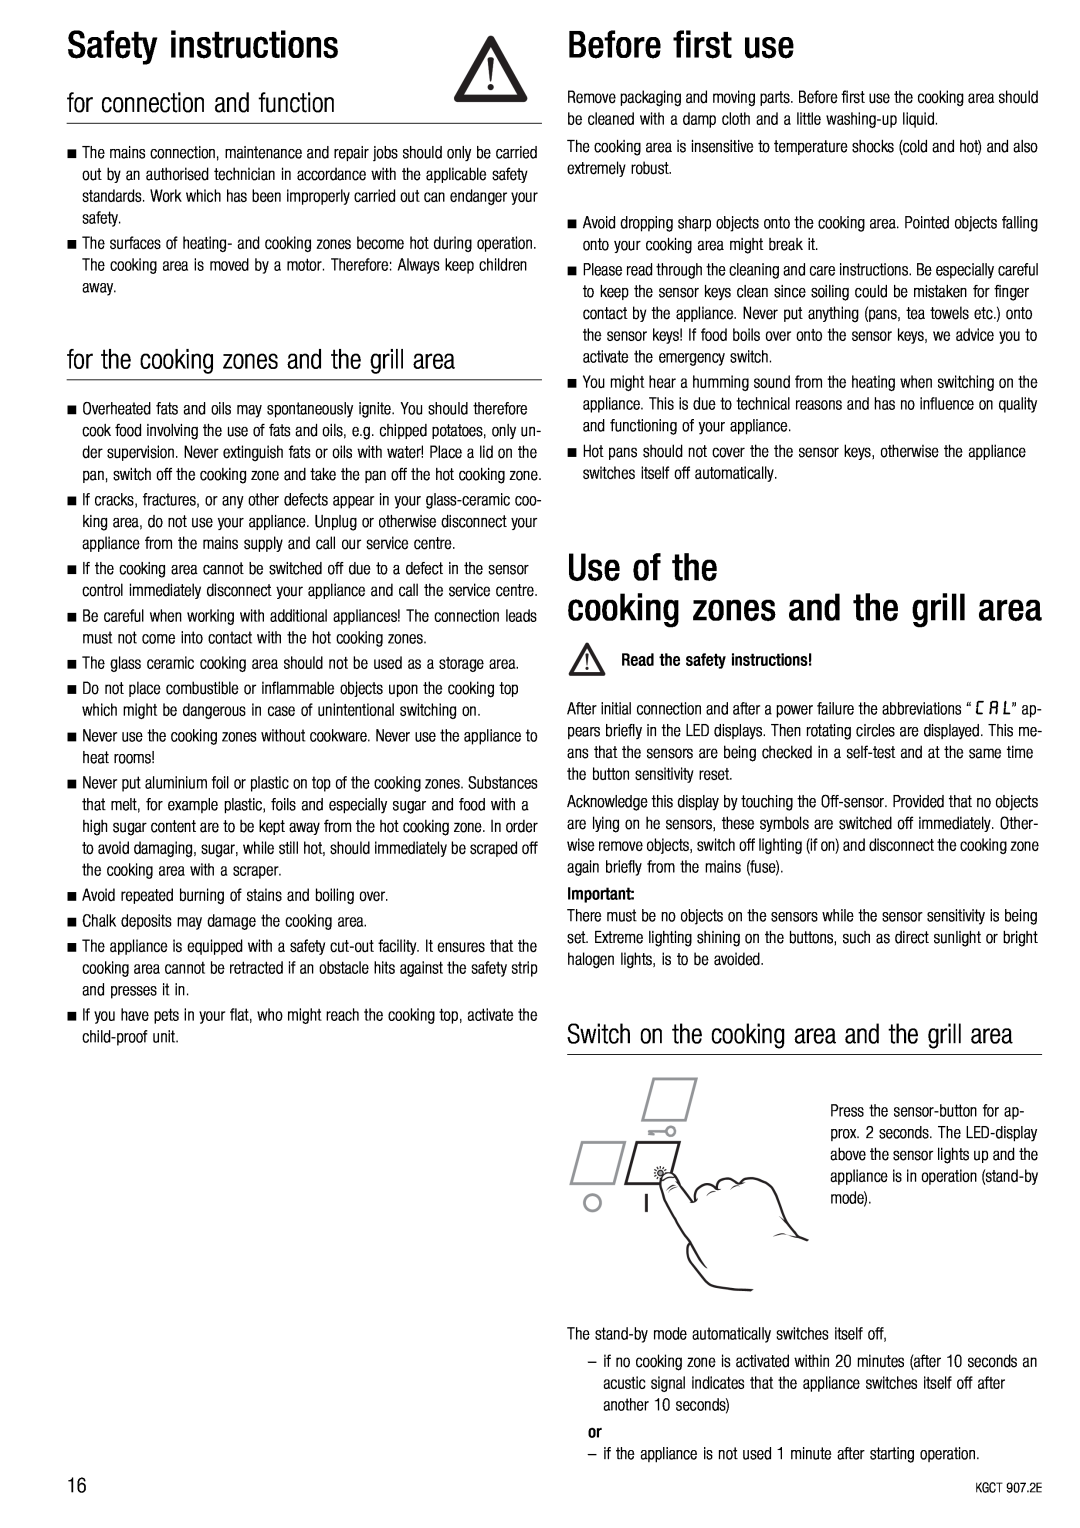 Kuppersbusch USA KGCT 907.2E Safety instructions, Before first use, Use of the, for connection and function 